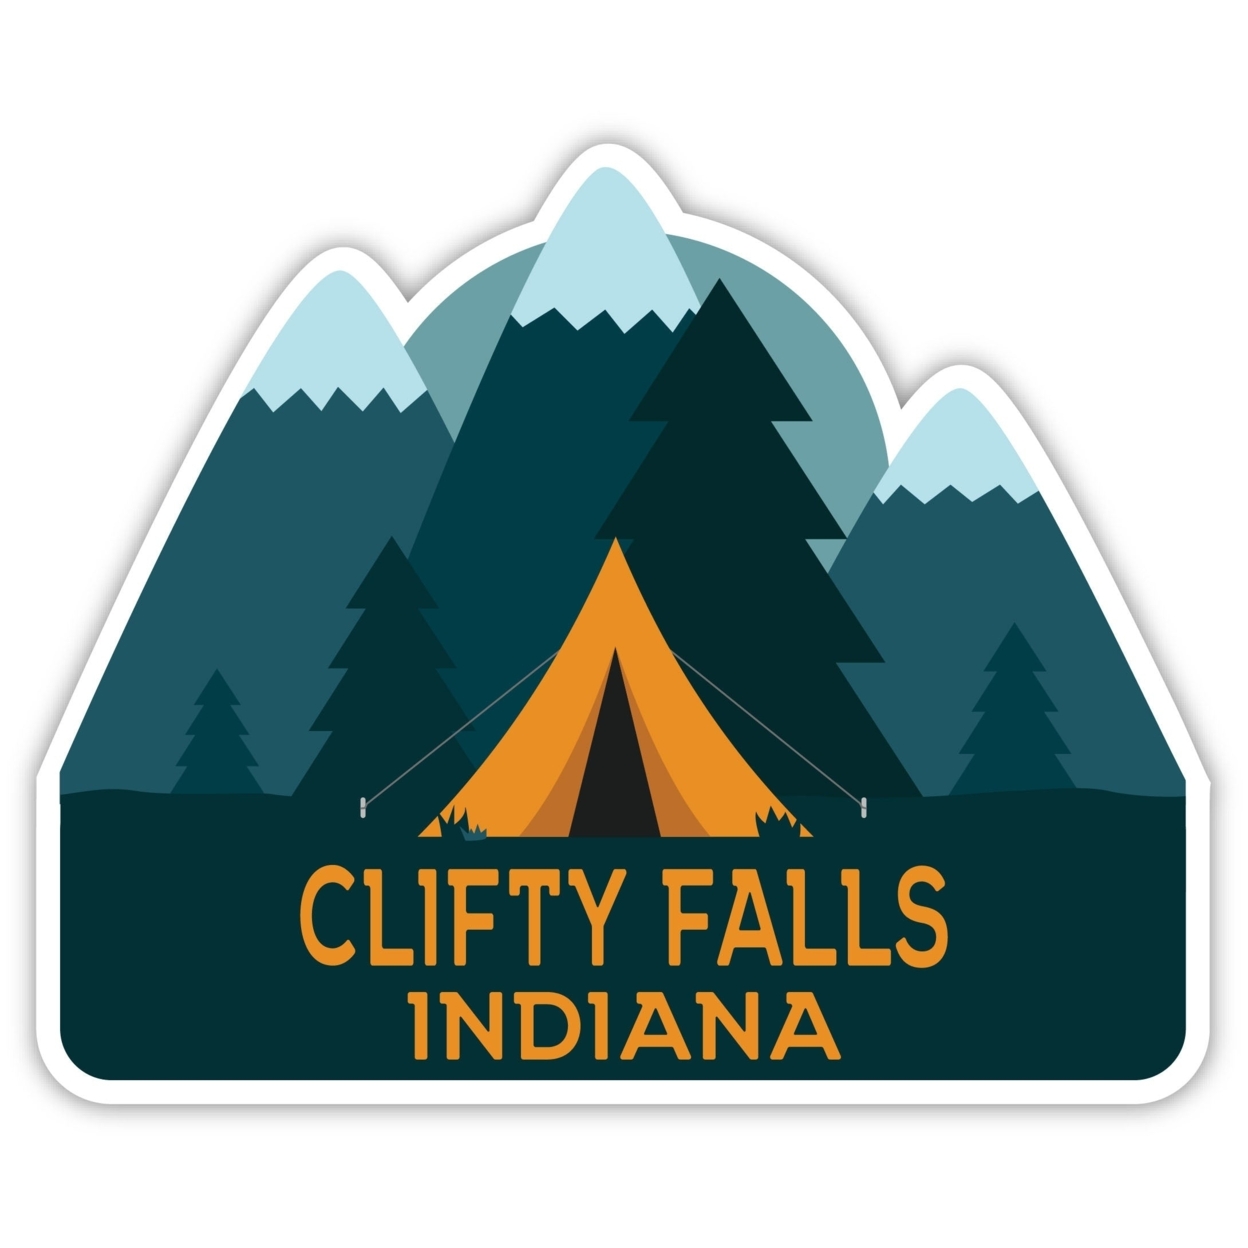 Clifty Falls Indiana Souvenir Decorative Stickers (Choose Theme And Size) - Single Unit, 8-Inch, Tent